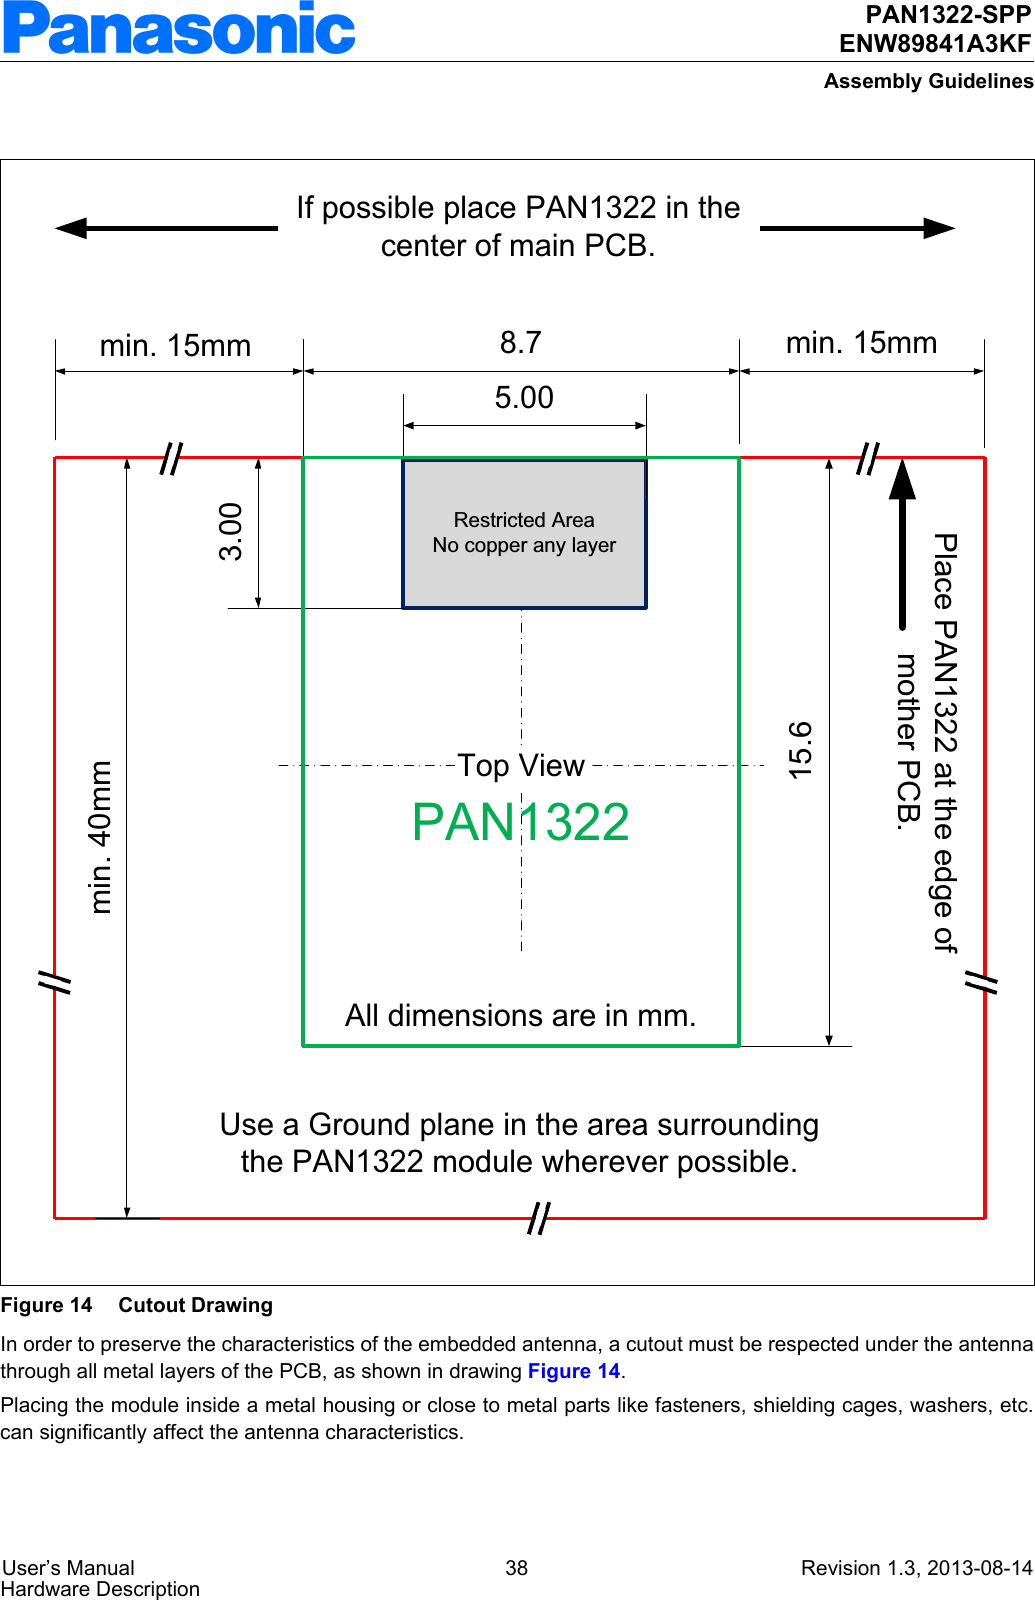  User’s Manual 37 Revision 1.3, 2013-08-14Hardware Description PAN1322-SPPENW89841A3KFAssembly Guidelines10 Assembly GuidelinesThe target of this chapter is to provide guidelines for customers to successfully introduce the PAN1322-SPPmodule in production. This includes general description, PCB-design, solder printing process, assembly, soldering process, rework and inspection.10.1 General Description of the ModulePAN1322-SPP is a Land Grid Array (LGA 8.7mm x 15.6mm) module made for surface mounting. The pad diameter is 0.6 mm and the pitch 1.2 mm.All solder joints on the module will reflow during soldering on the mother board. All components and shield will stay in place due to wetting force. Wave soldering is not possible.Surface treatment on the module pads is Nickel (5 - 8 µm)/Gold (0.04 - 0.10 µm).Figure 13 shows the pad layout on the module, seen from the component side.F2 F3 F4 F5E1 E2 E3 E4 E5 E6 E7 E8 E9D1 D2 D3 D4 D5 D6 D7 D8C1 C2 C3 C4 C5 C6 C7 C8B1 B2 B3 B4 B5 B6 B7 B8 B9A2 A3 A4 A5 A6 A7 A8A11.08.70 mm0.65.00.61.35 1.351.2F91.2F7F1 F8D9C9A915.6 mmF6 F11A11F12A122.4Figure 13 Pad Layout on the Module (top view)10.2 Printed Circuit Board DesignThe land pattern on the PCB shall be according to the land pattern on the module, which means that the diameter of the LGA pads on the PCB shall be 0.6 mm. It is recommended that each pad on the PCB shall be surrounded by a solder mask clearance of about 75 µm to avoid overlapping solder mask and pad.